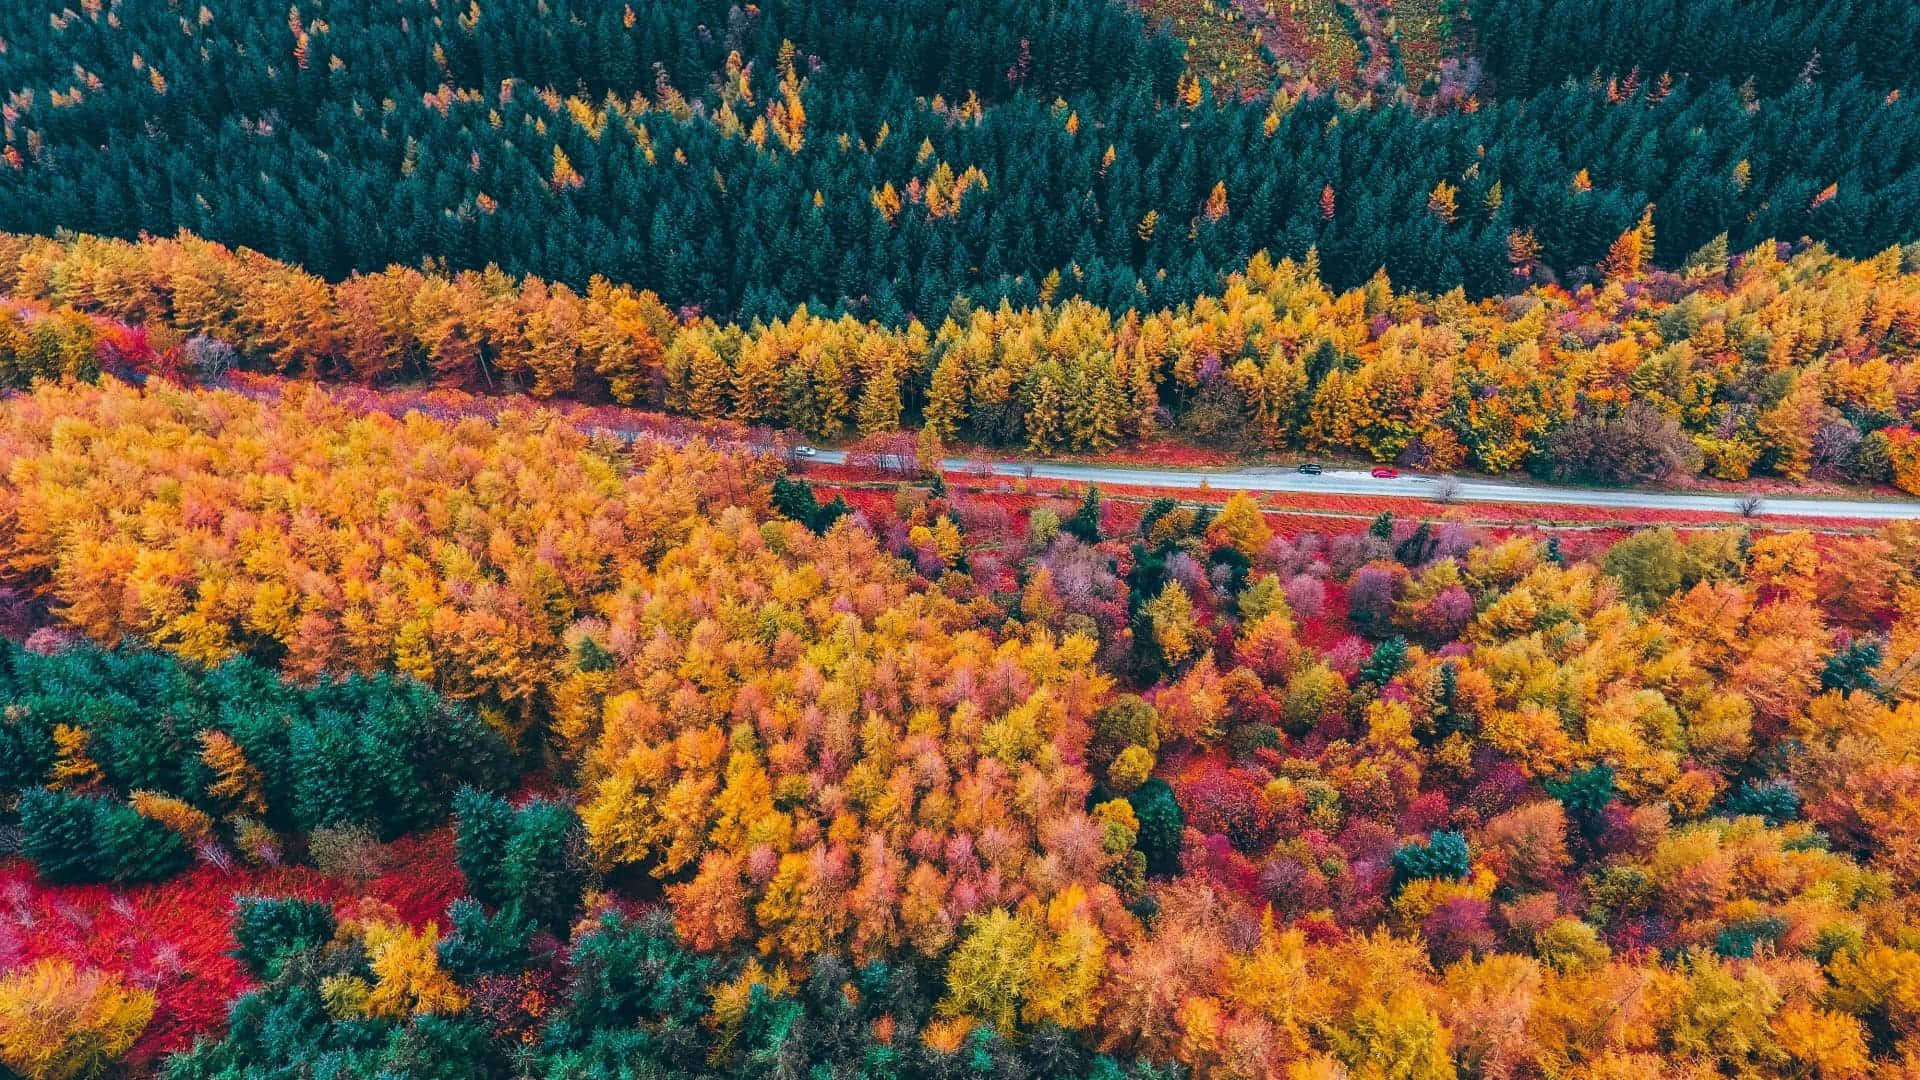 Experience the beauty of Fall from the comfort of your desktop.